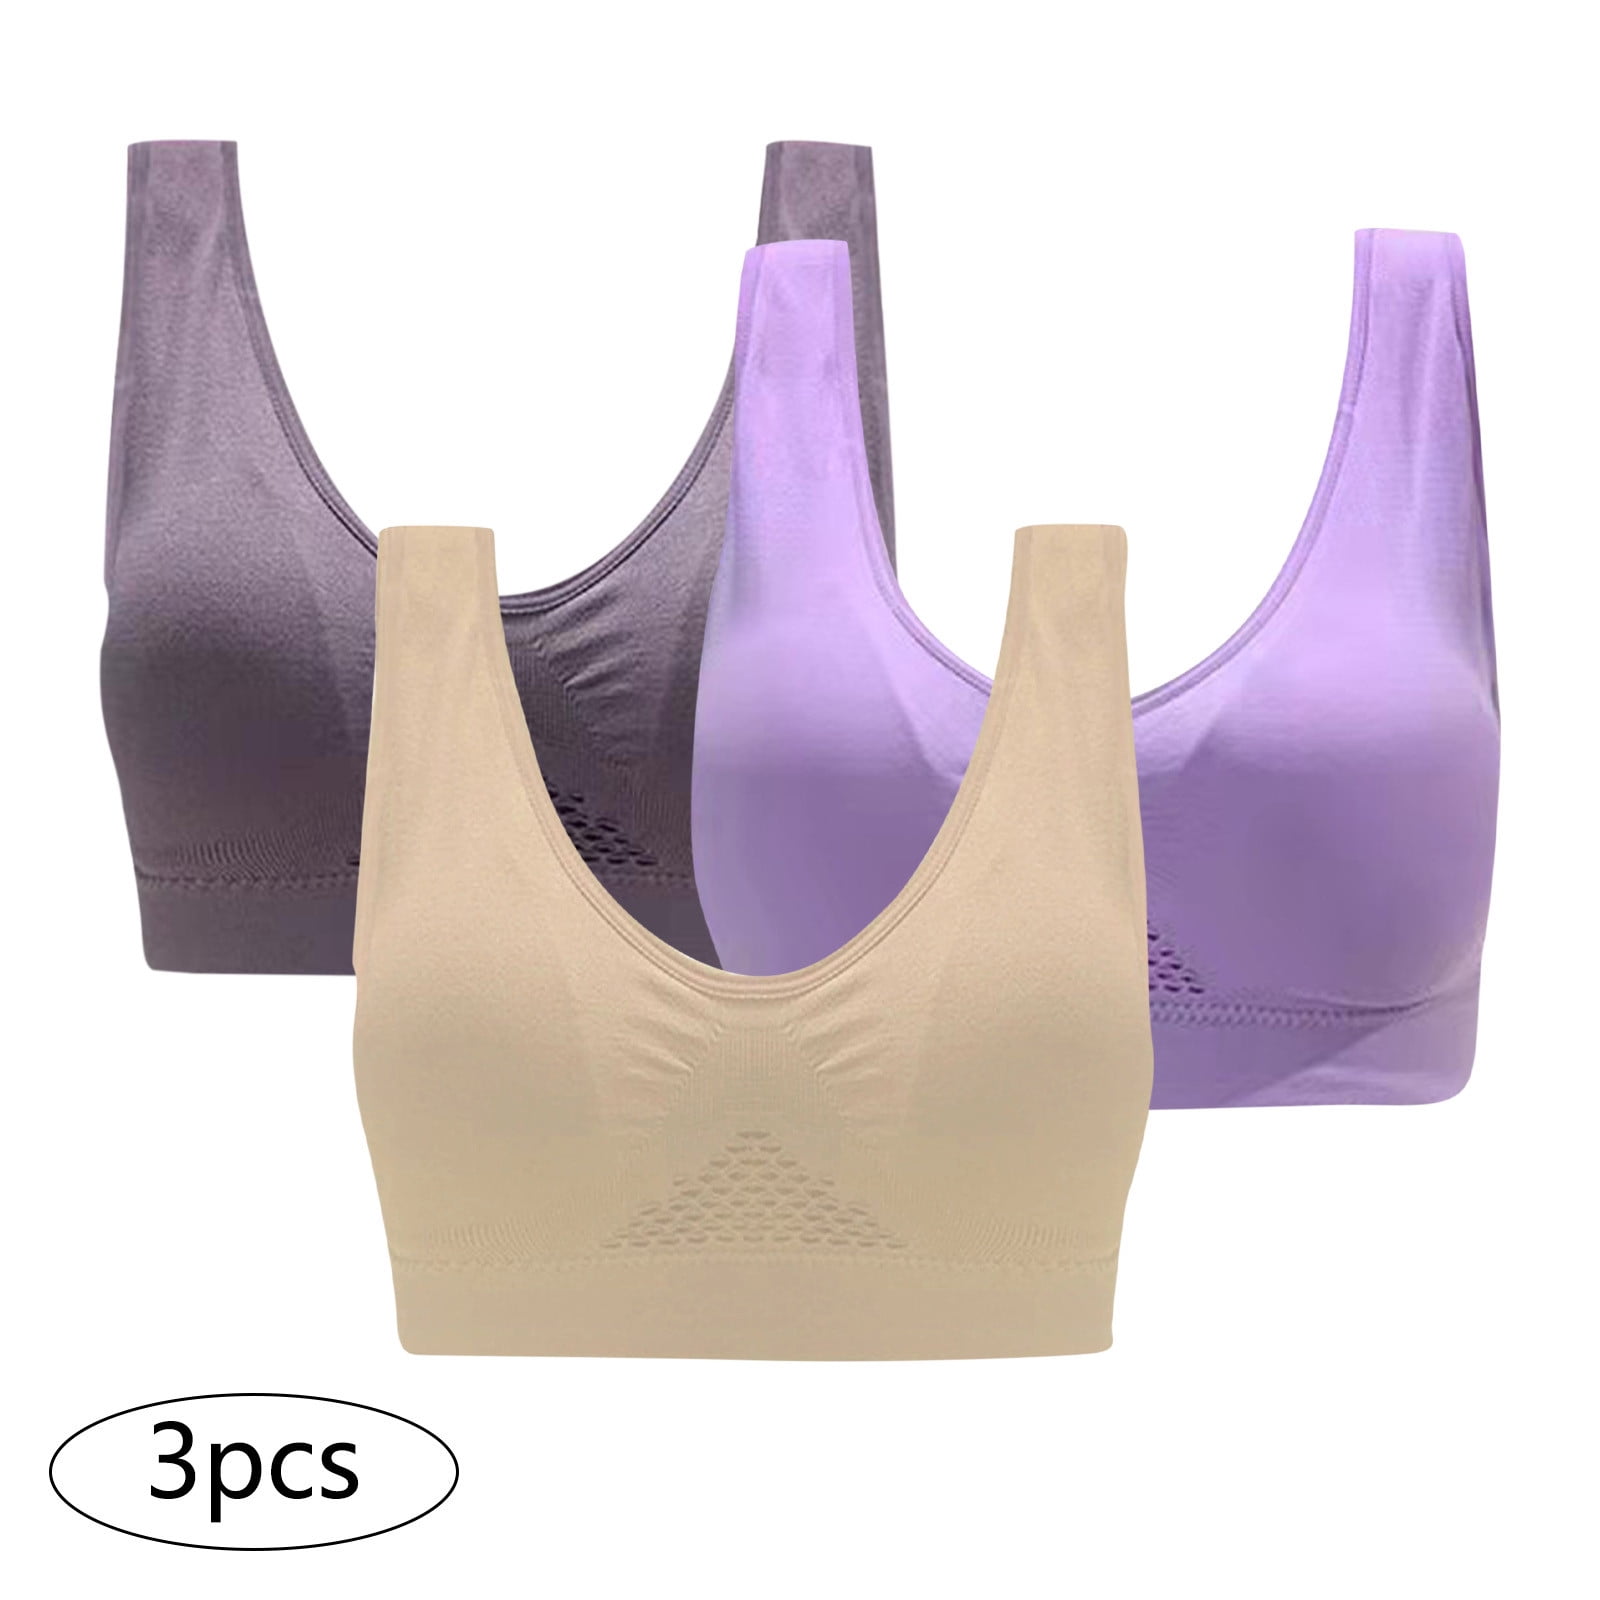 Lace Sports Bras for Women 5/8 Cup Wirefree Support Brassiere